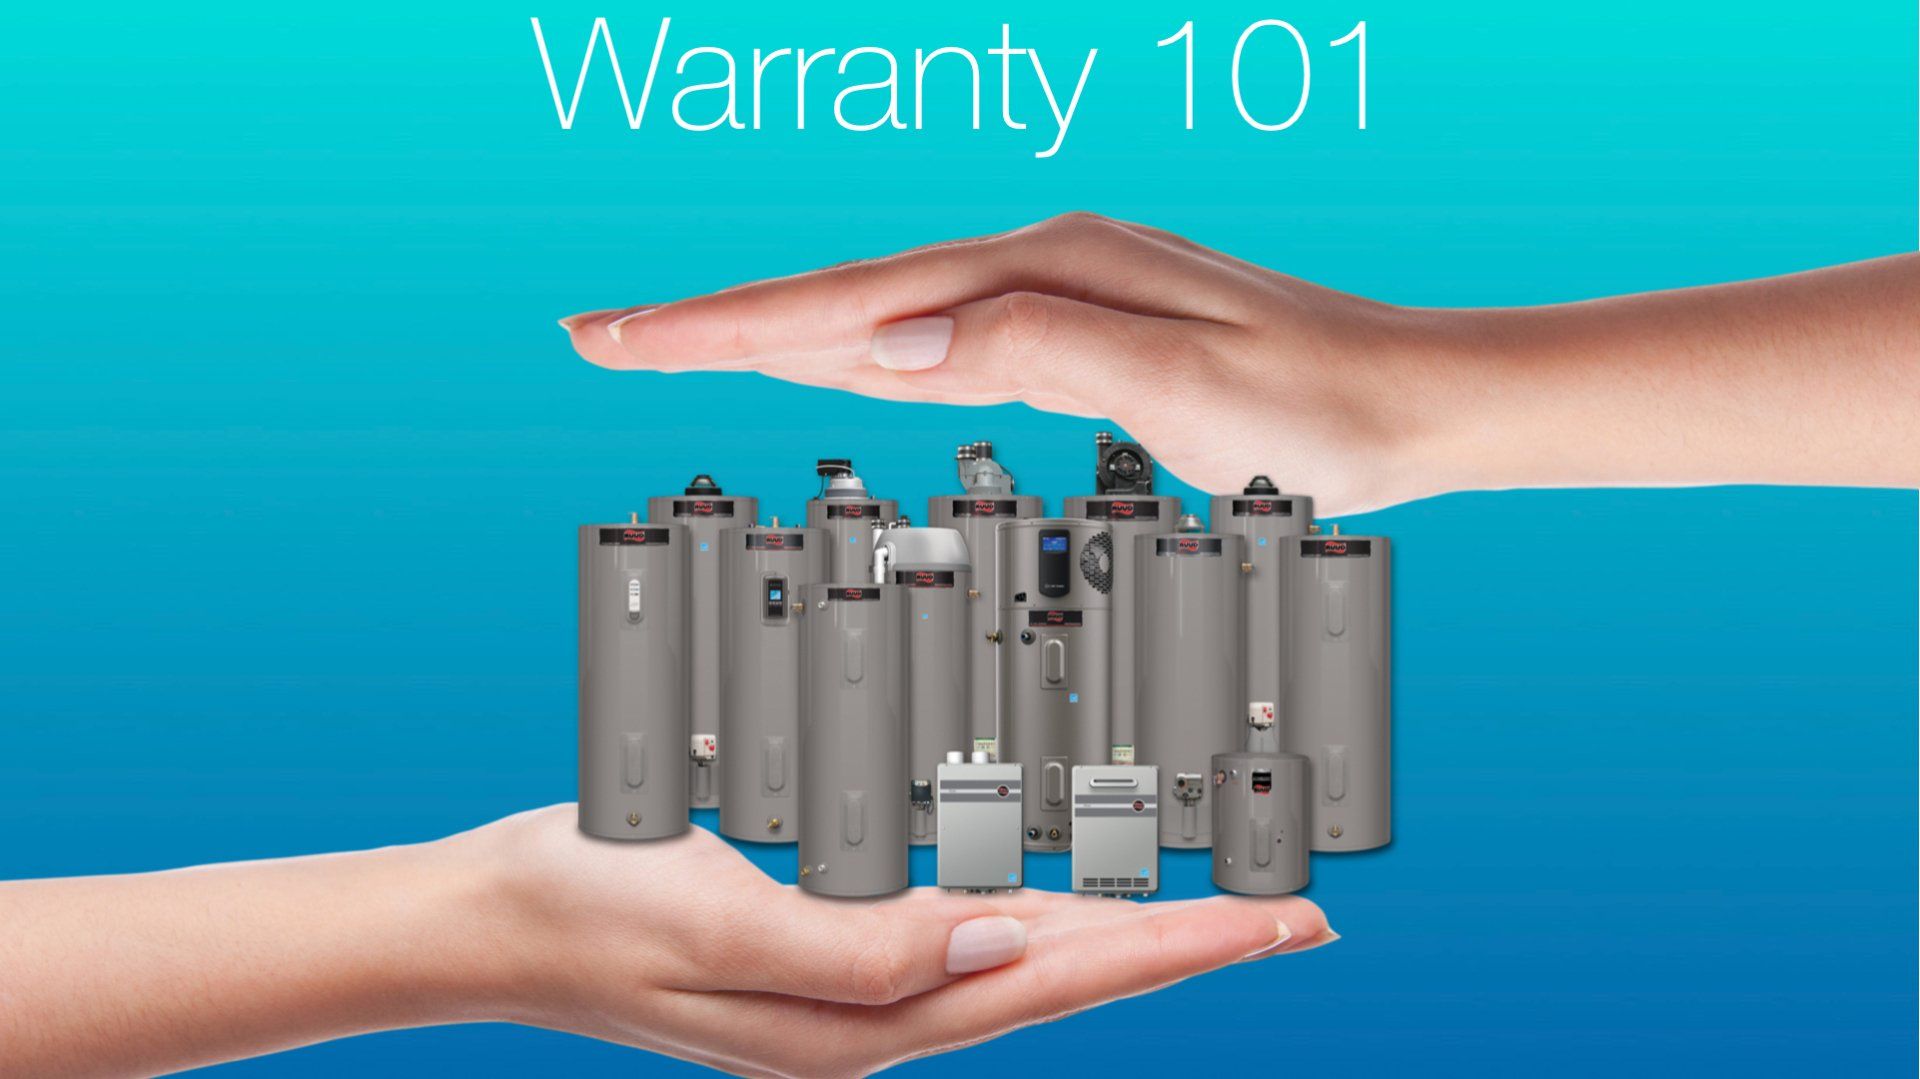 Warranty 101 - Two hands surrounding Ruud water heaters product grouping